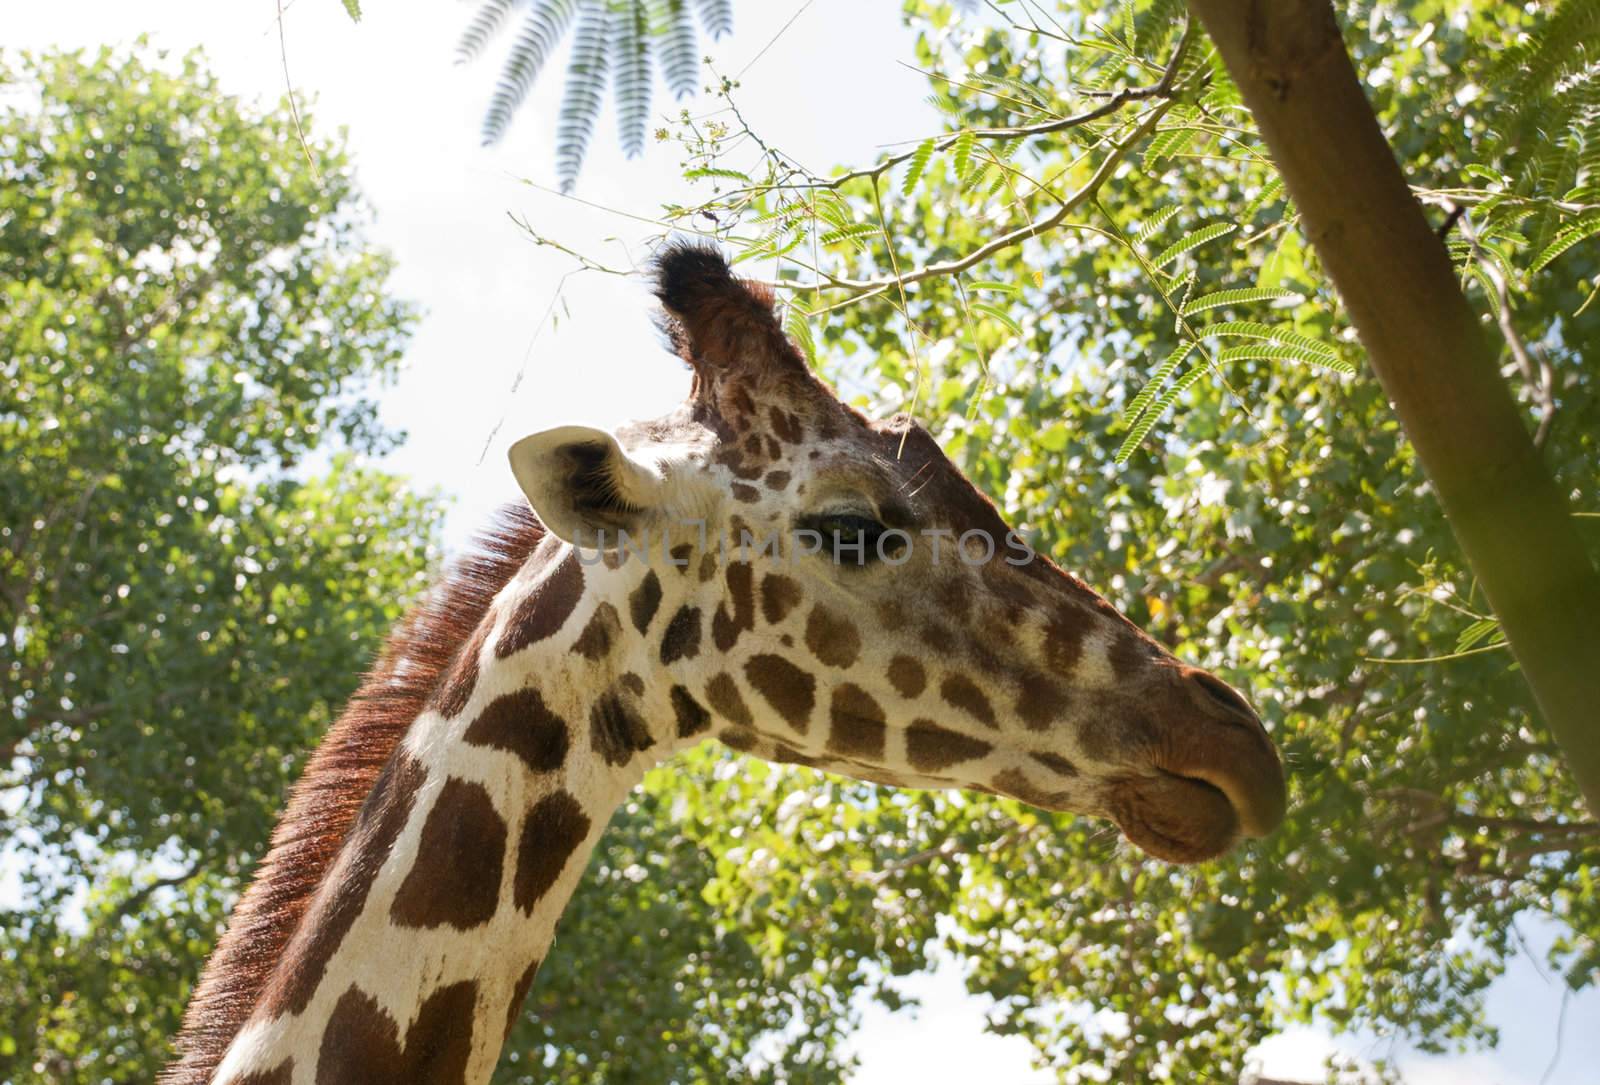 a tall graffe eating leaves from a tree at the zoo